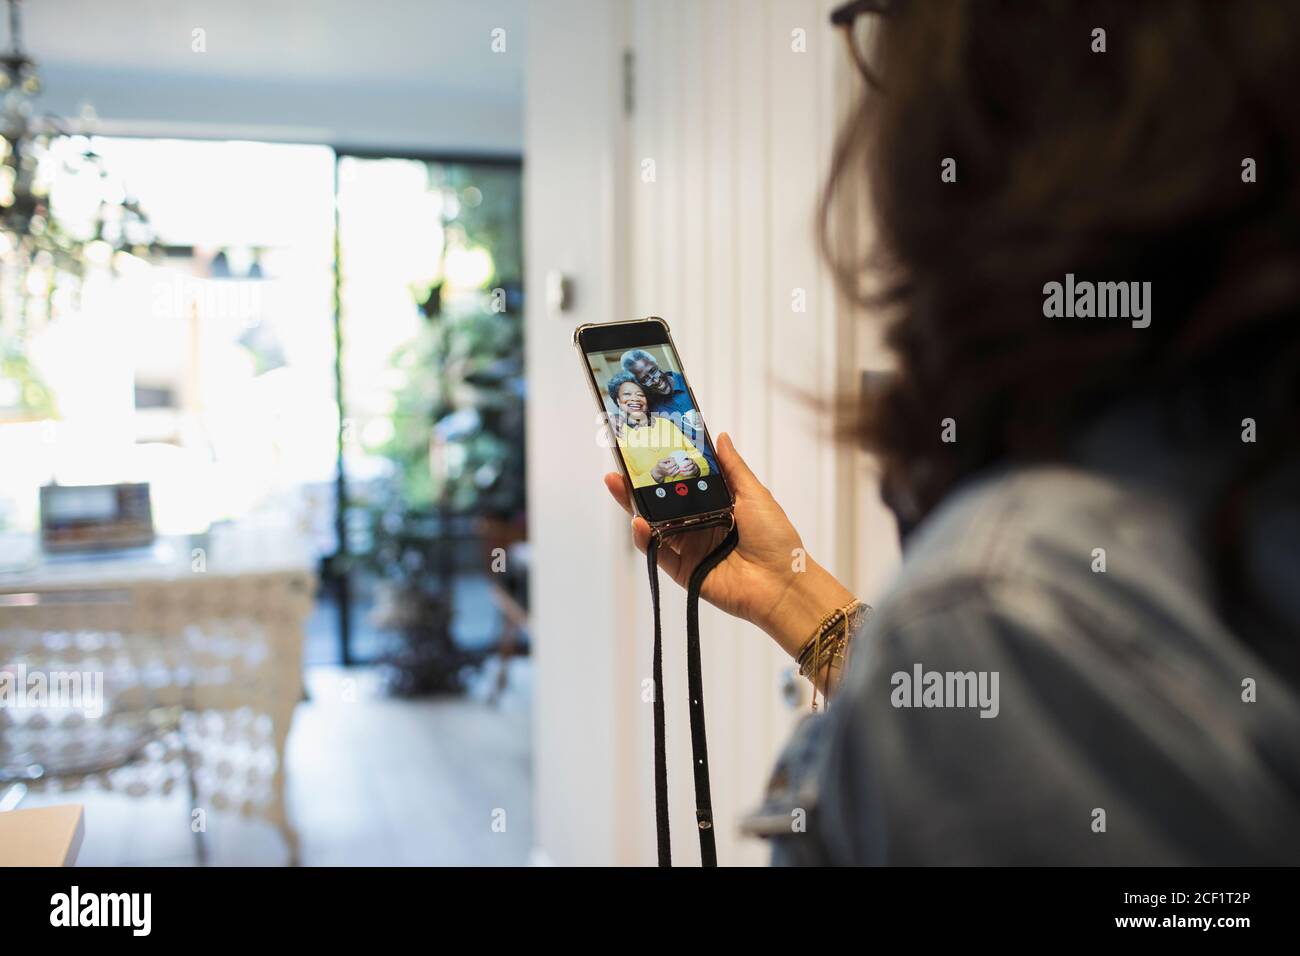 Woman video chatting with friends on smart phone screen Stock Photo